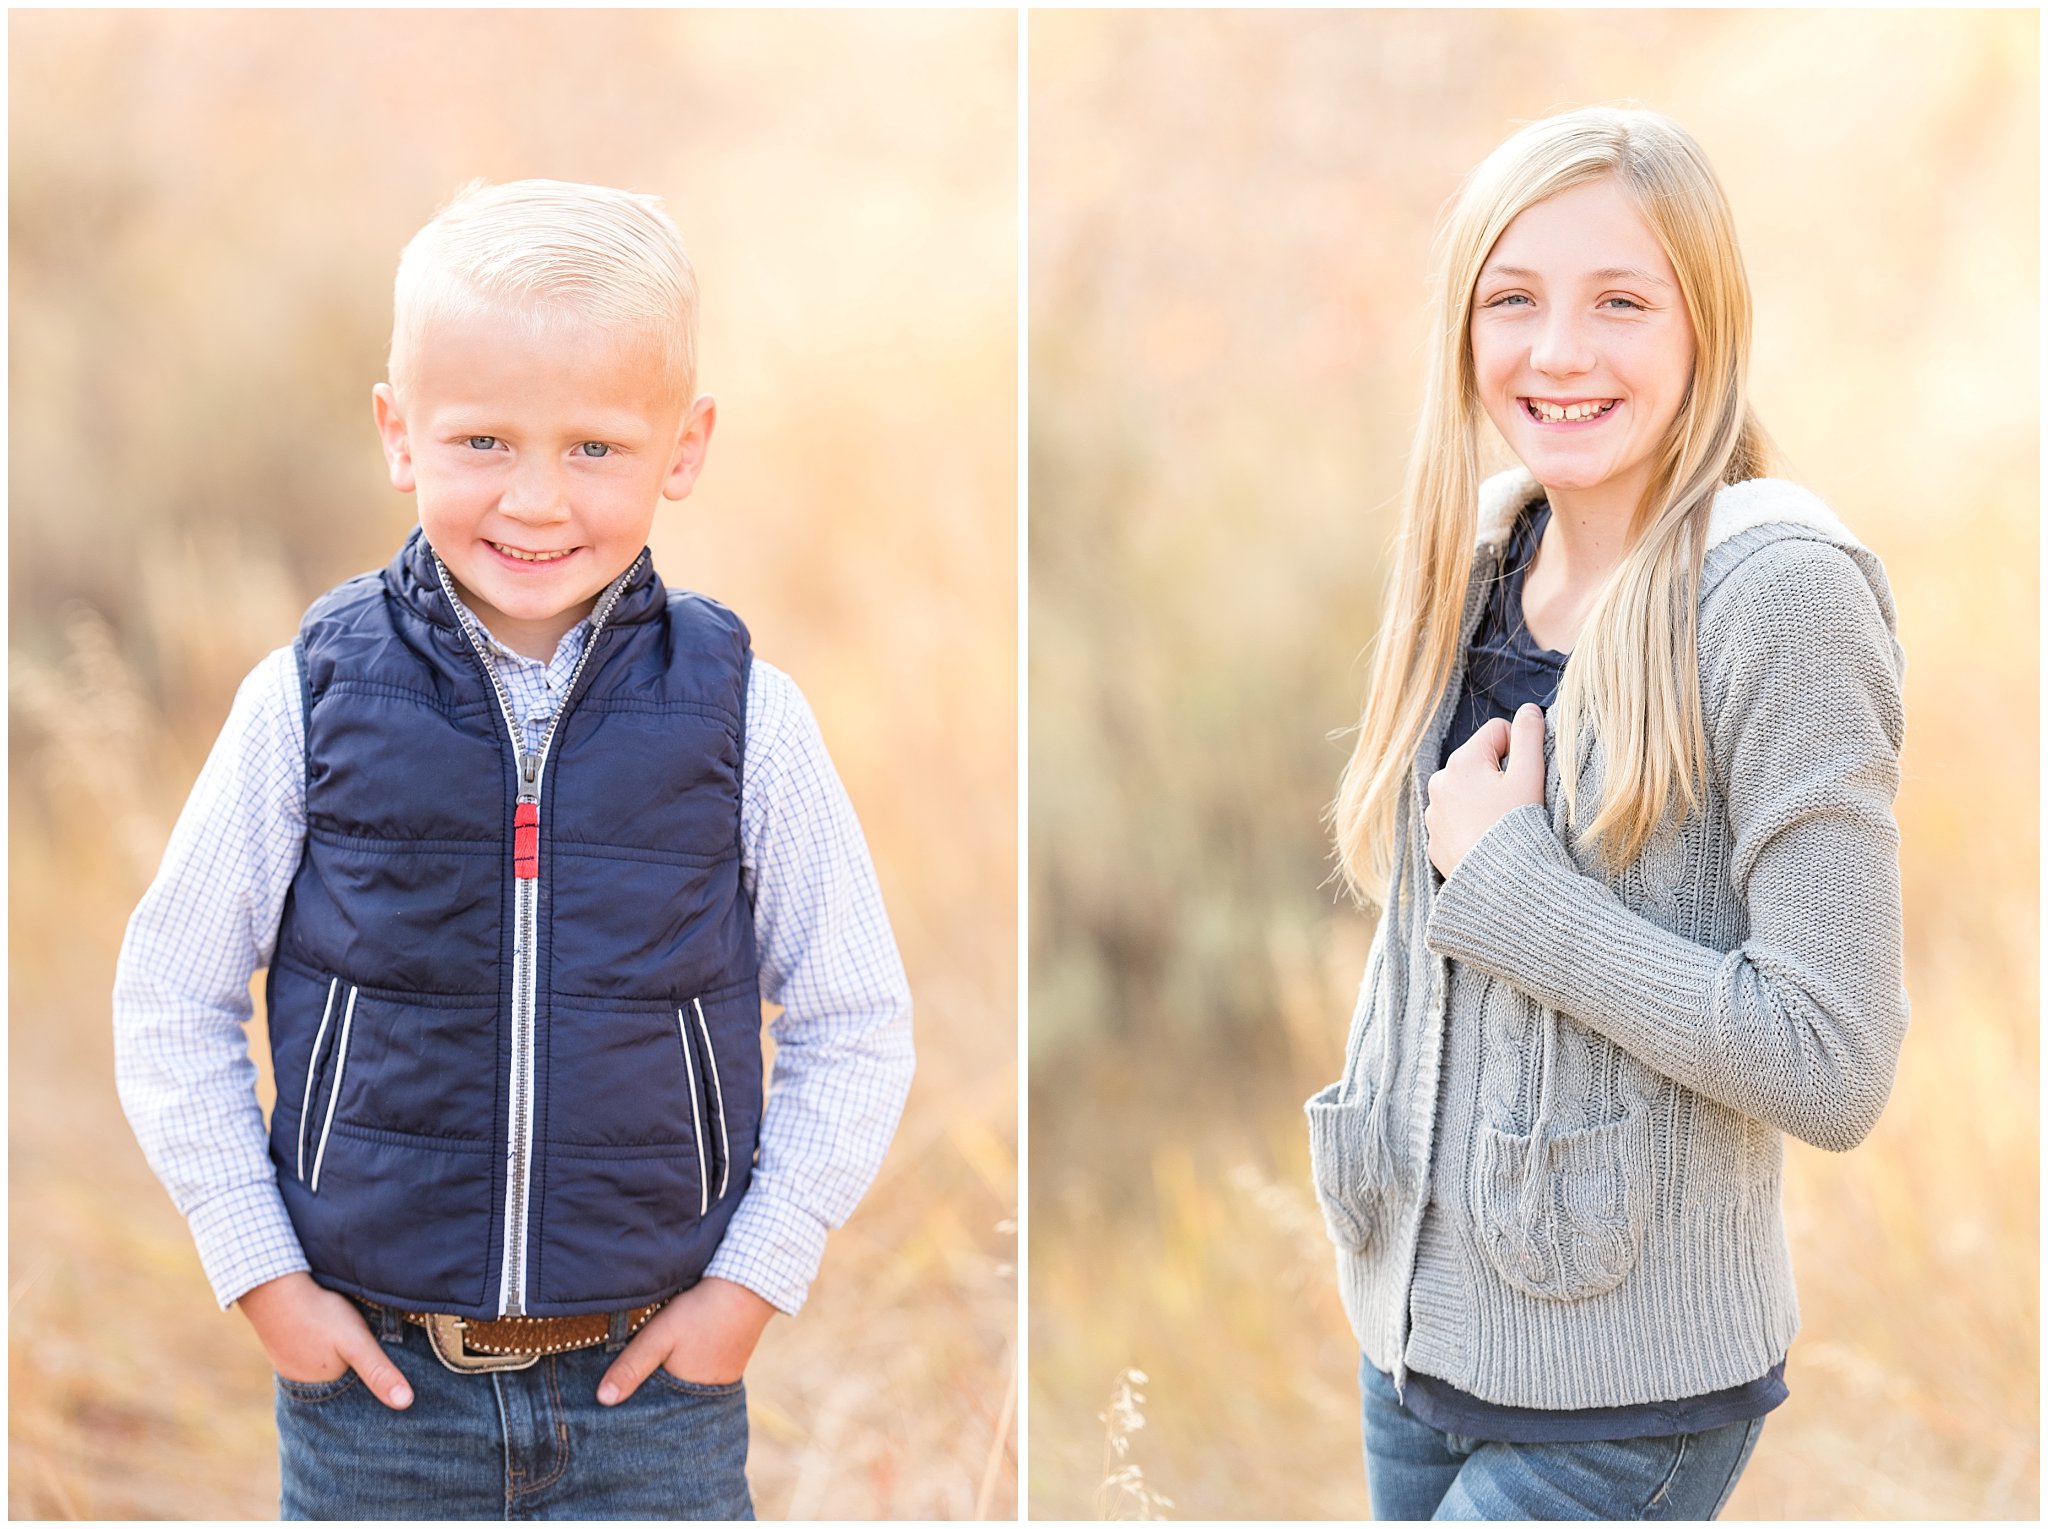 Portraits of young kids | Fall family photo session at Snowbasin | Snowbasin Resort | Jessie and Dallin Photography